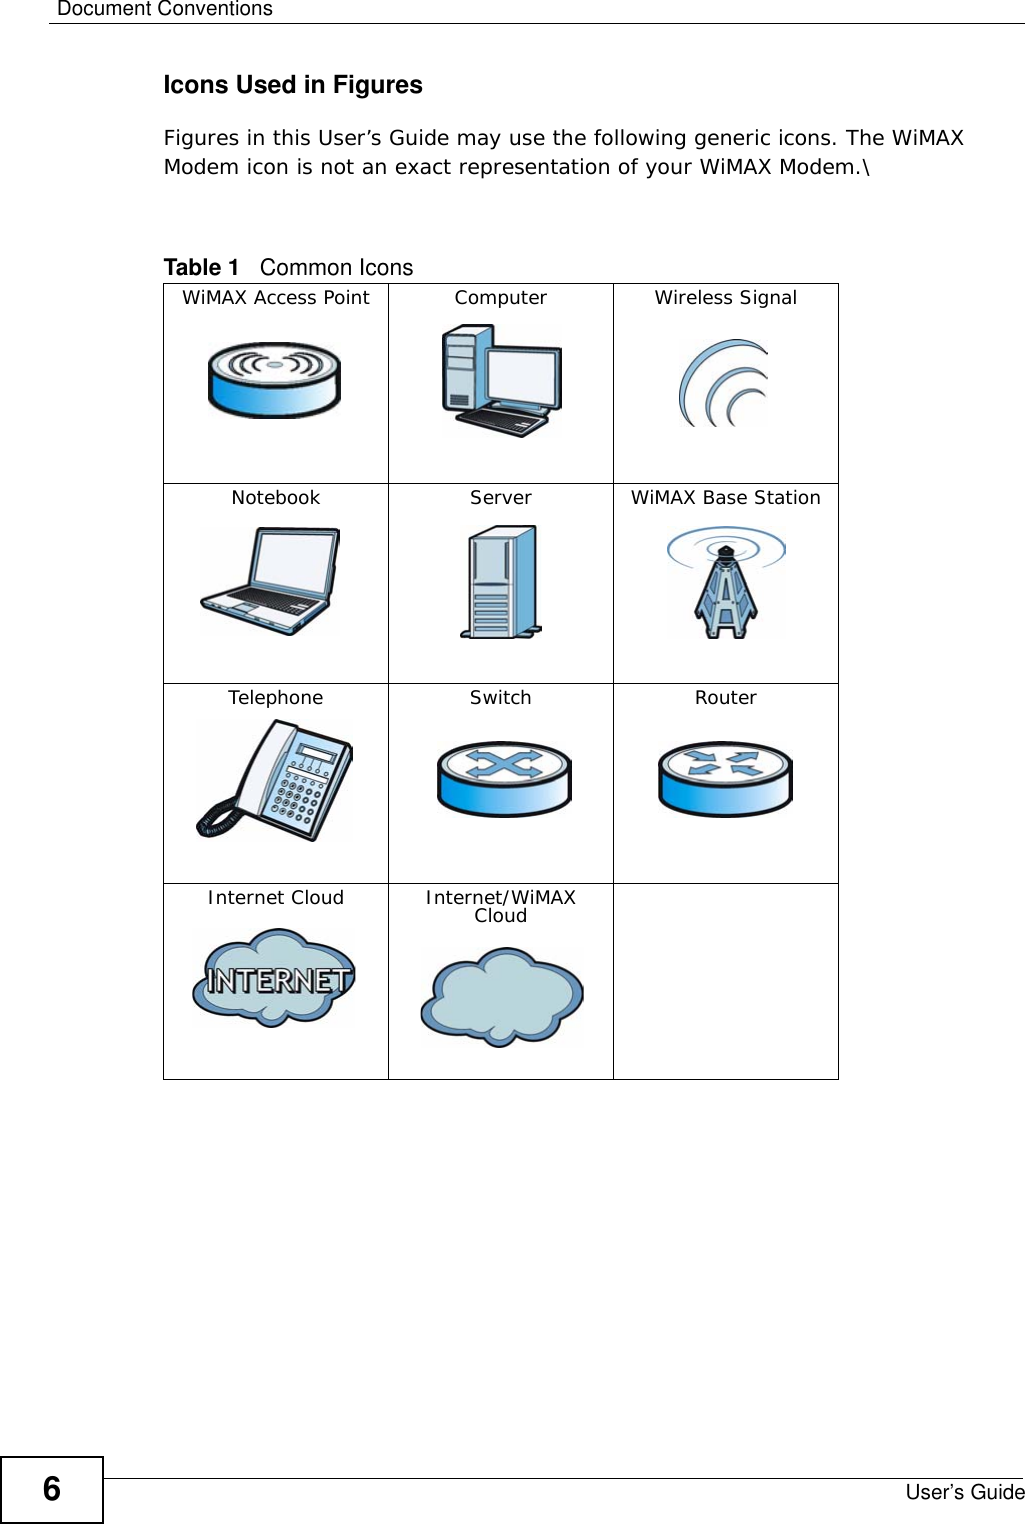 Document ConventionsUser’s Guide6Icons Used in FiguresFigures in this User’s Guide may use the following generic icons. The WiMAX Modem icon is not an exact representation of your WiMAX Modem.\Table 1   Common IconsWiMAX Access Point Computer Wireless SignalNotebook Server WiMAX Base StationTelephone Switch RouterInternet Cloud Internet/WiMAX Cloud